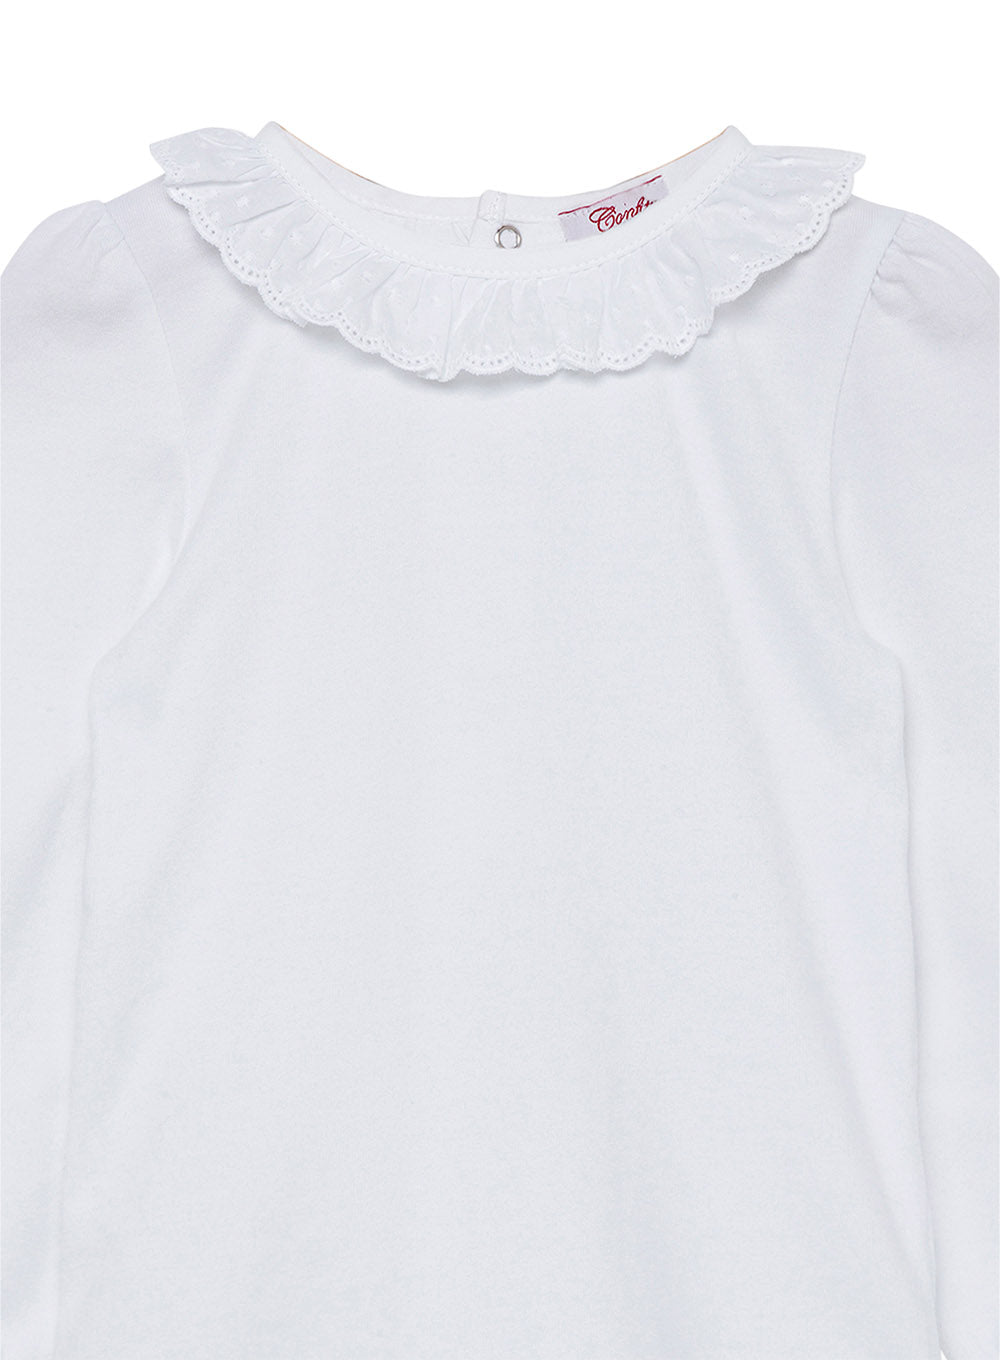 Baby Girls Long-Sleeve Laura Anglaise Bodysuit in White | Trotters ...